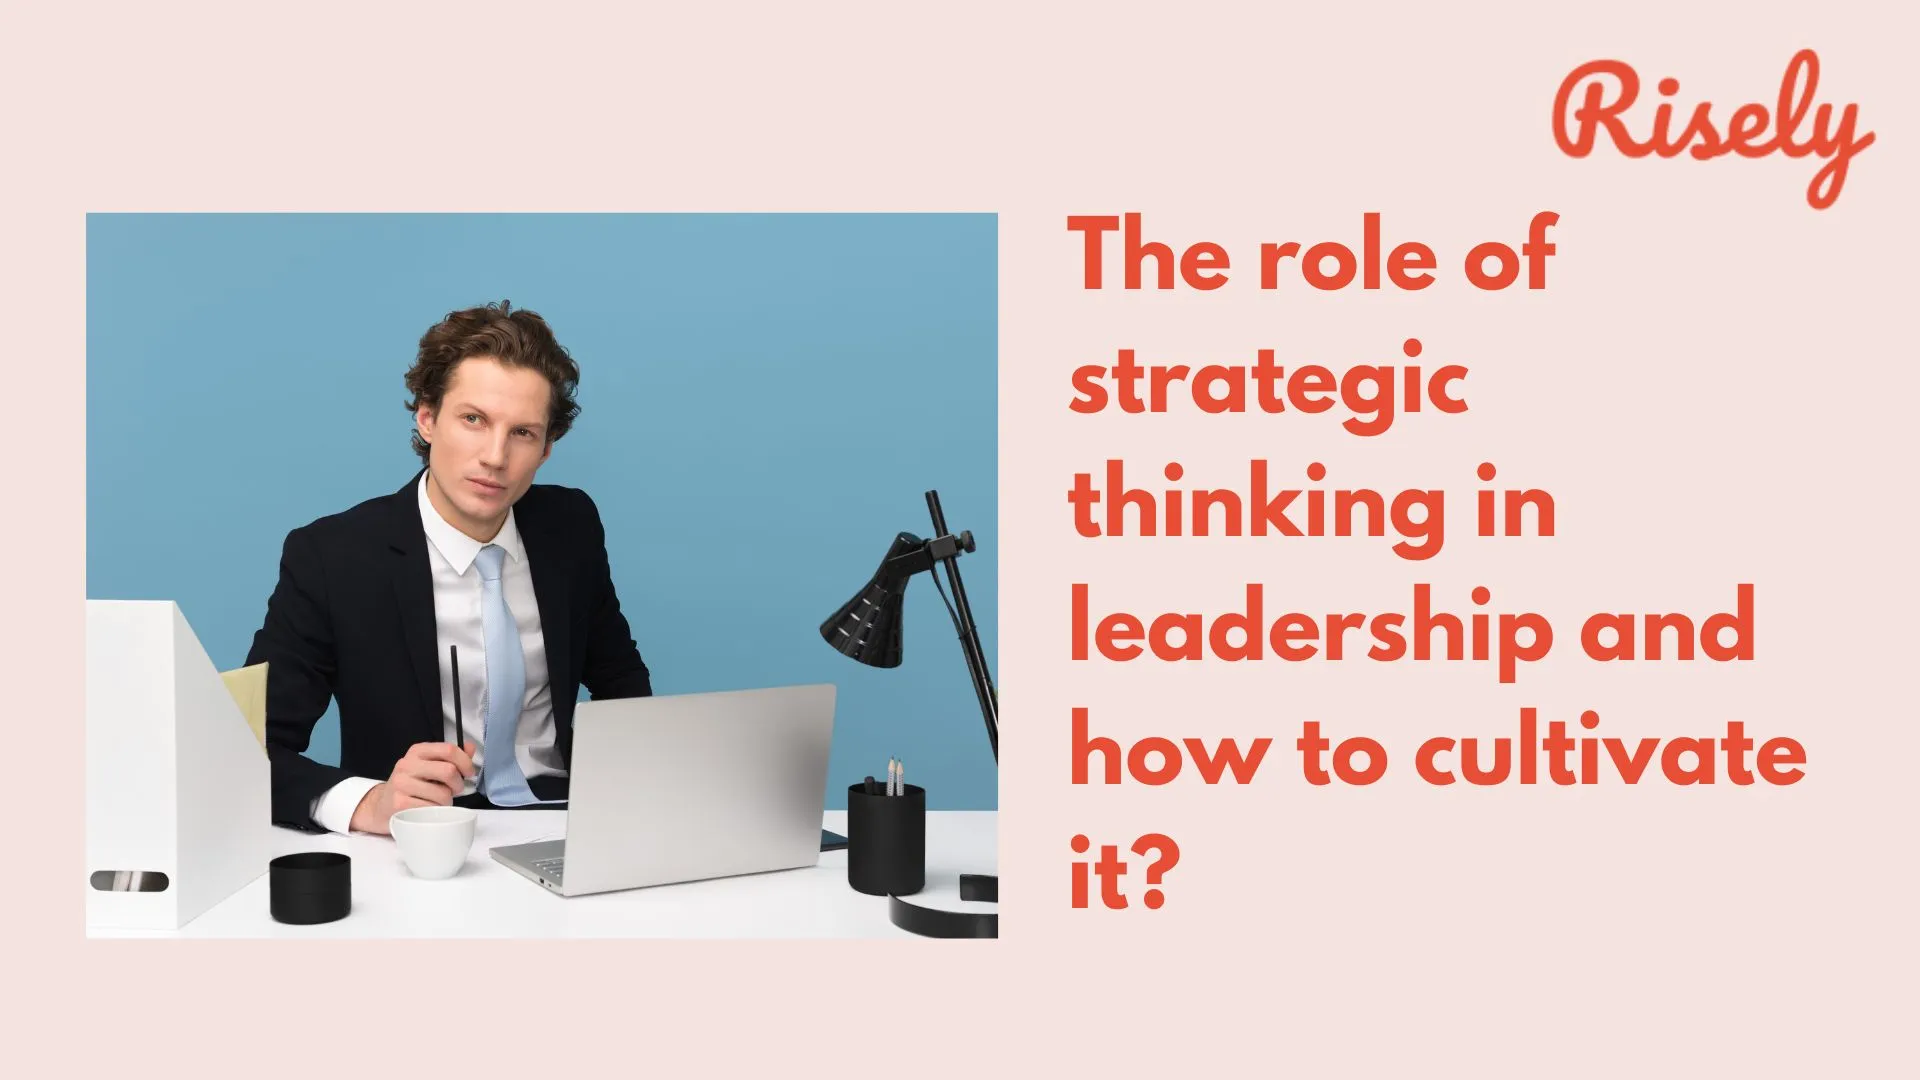 The role of strategic thinking in leadership and how to cultivate it?